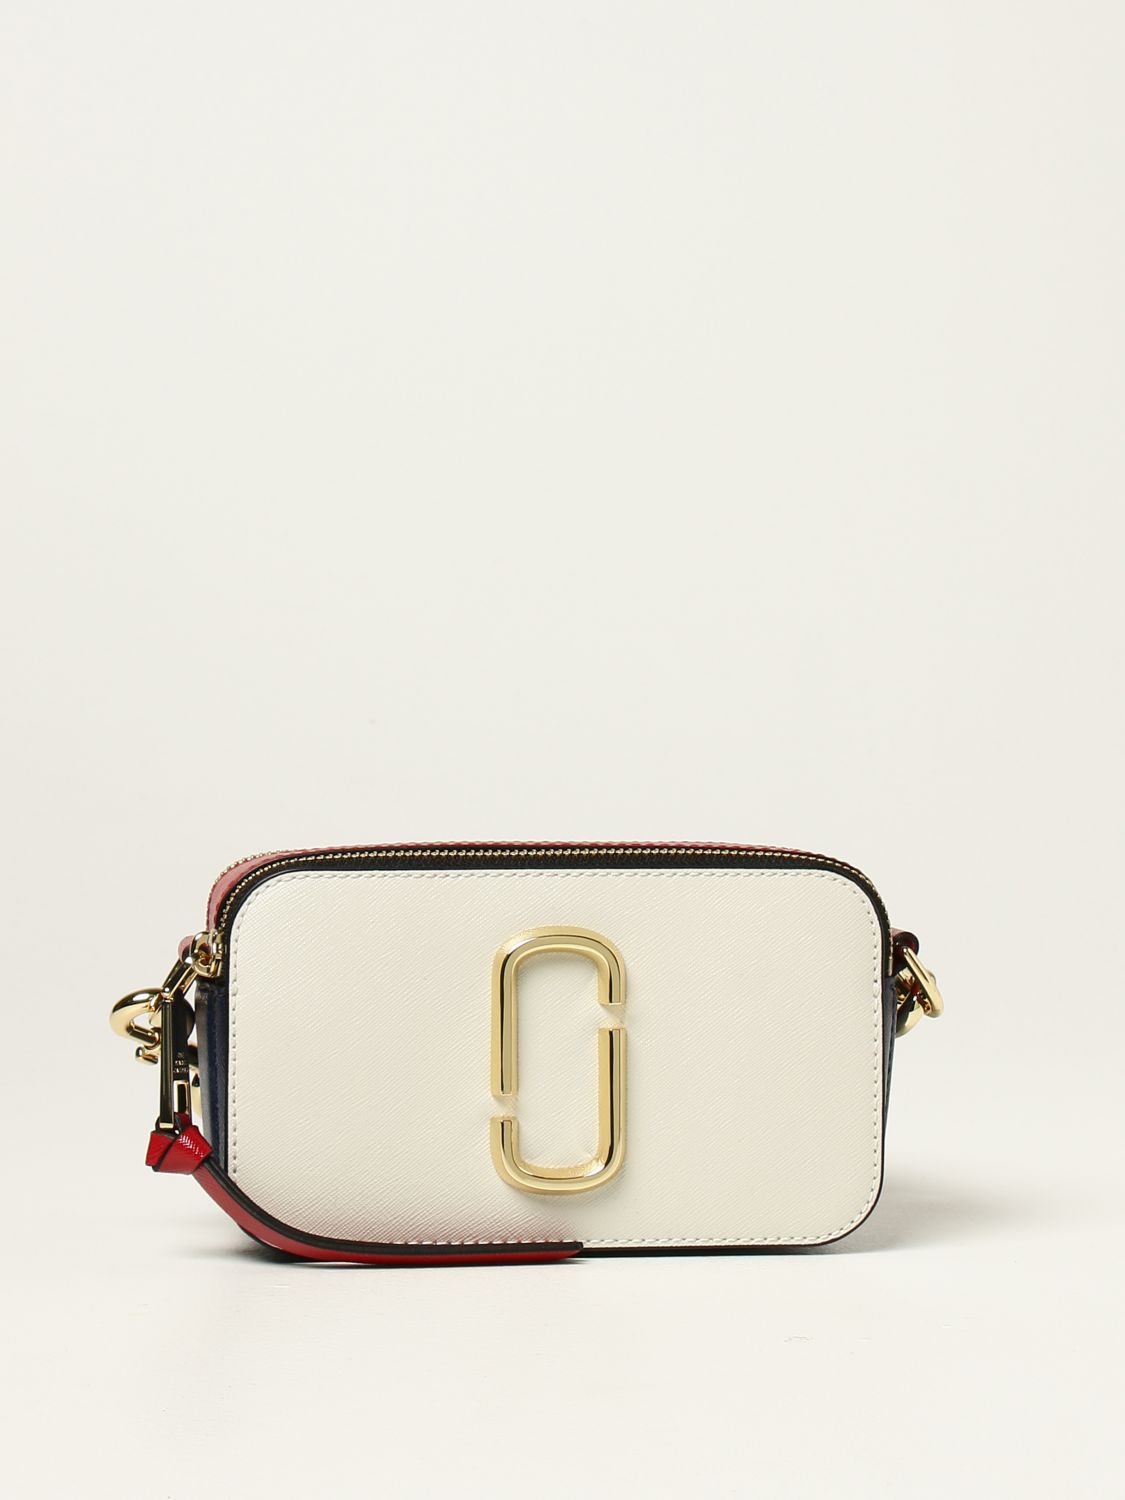 marc jacobs snapshot bag white and red